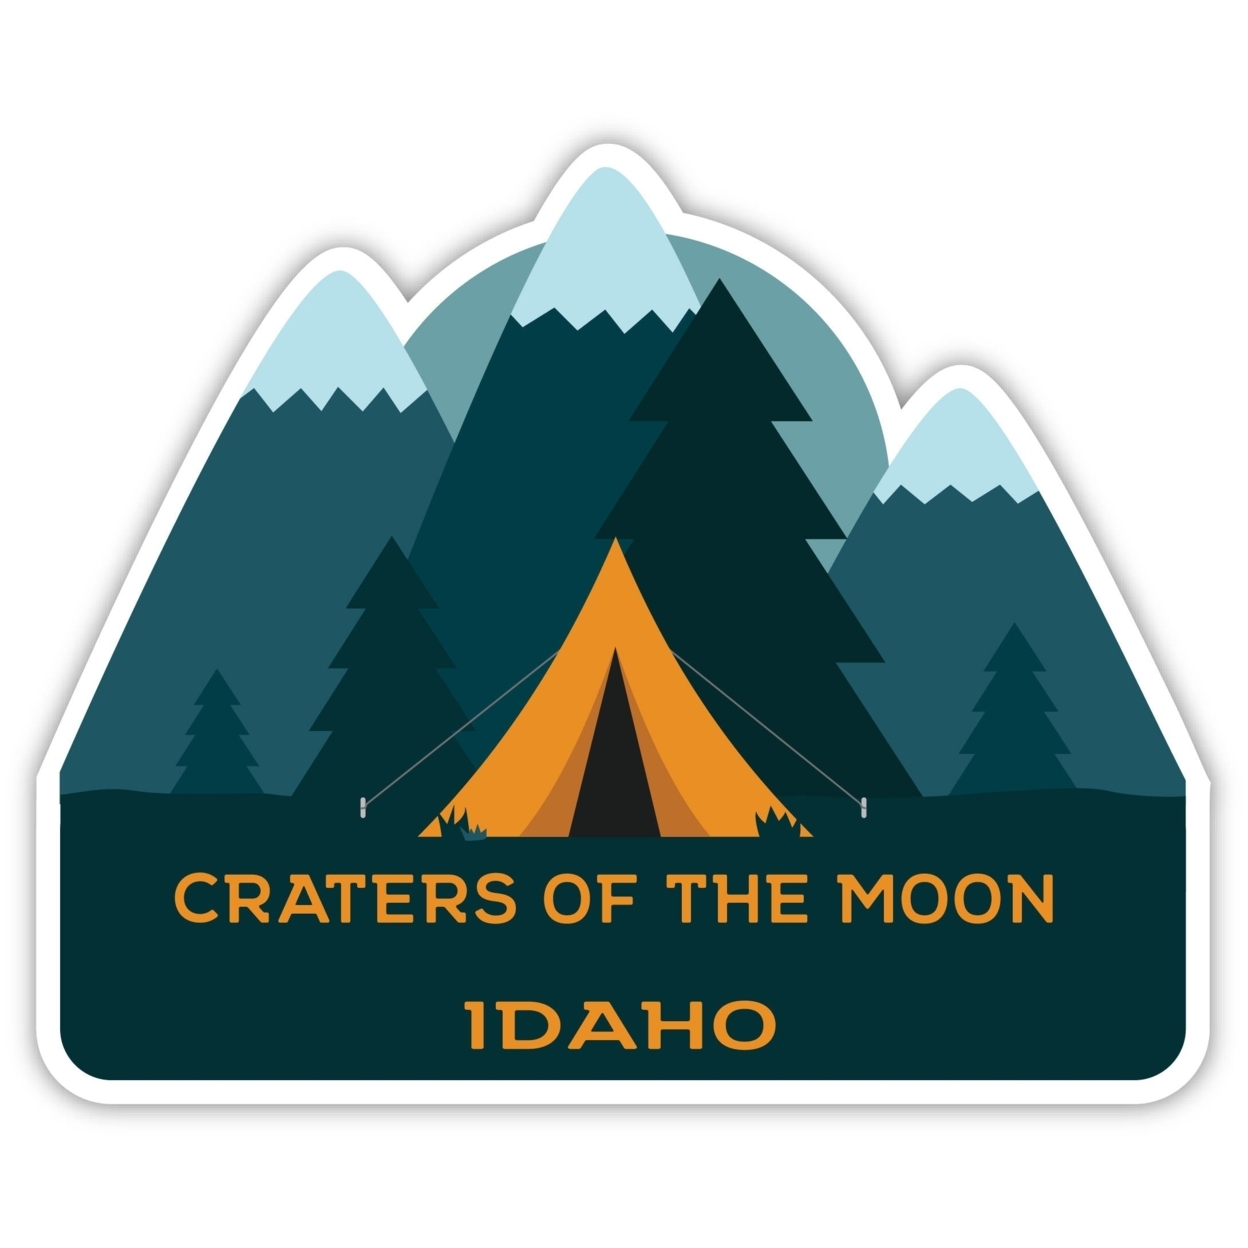 Craters Of The Moon Idaho Souvenir Decorative Stickers (Choose Theme And Size) - 4-Pack, 6-Inch, Bear